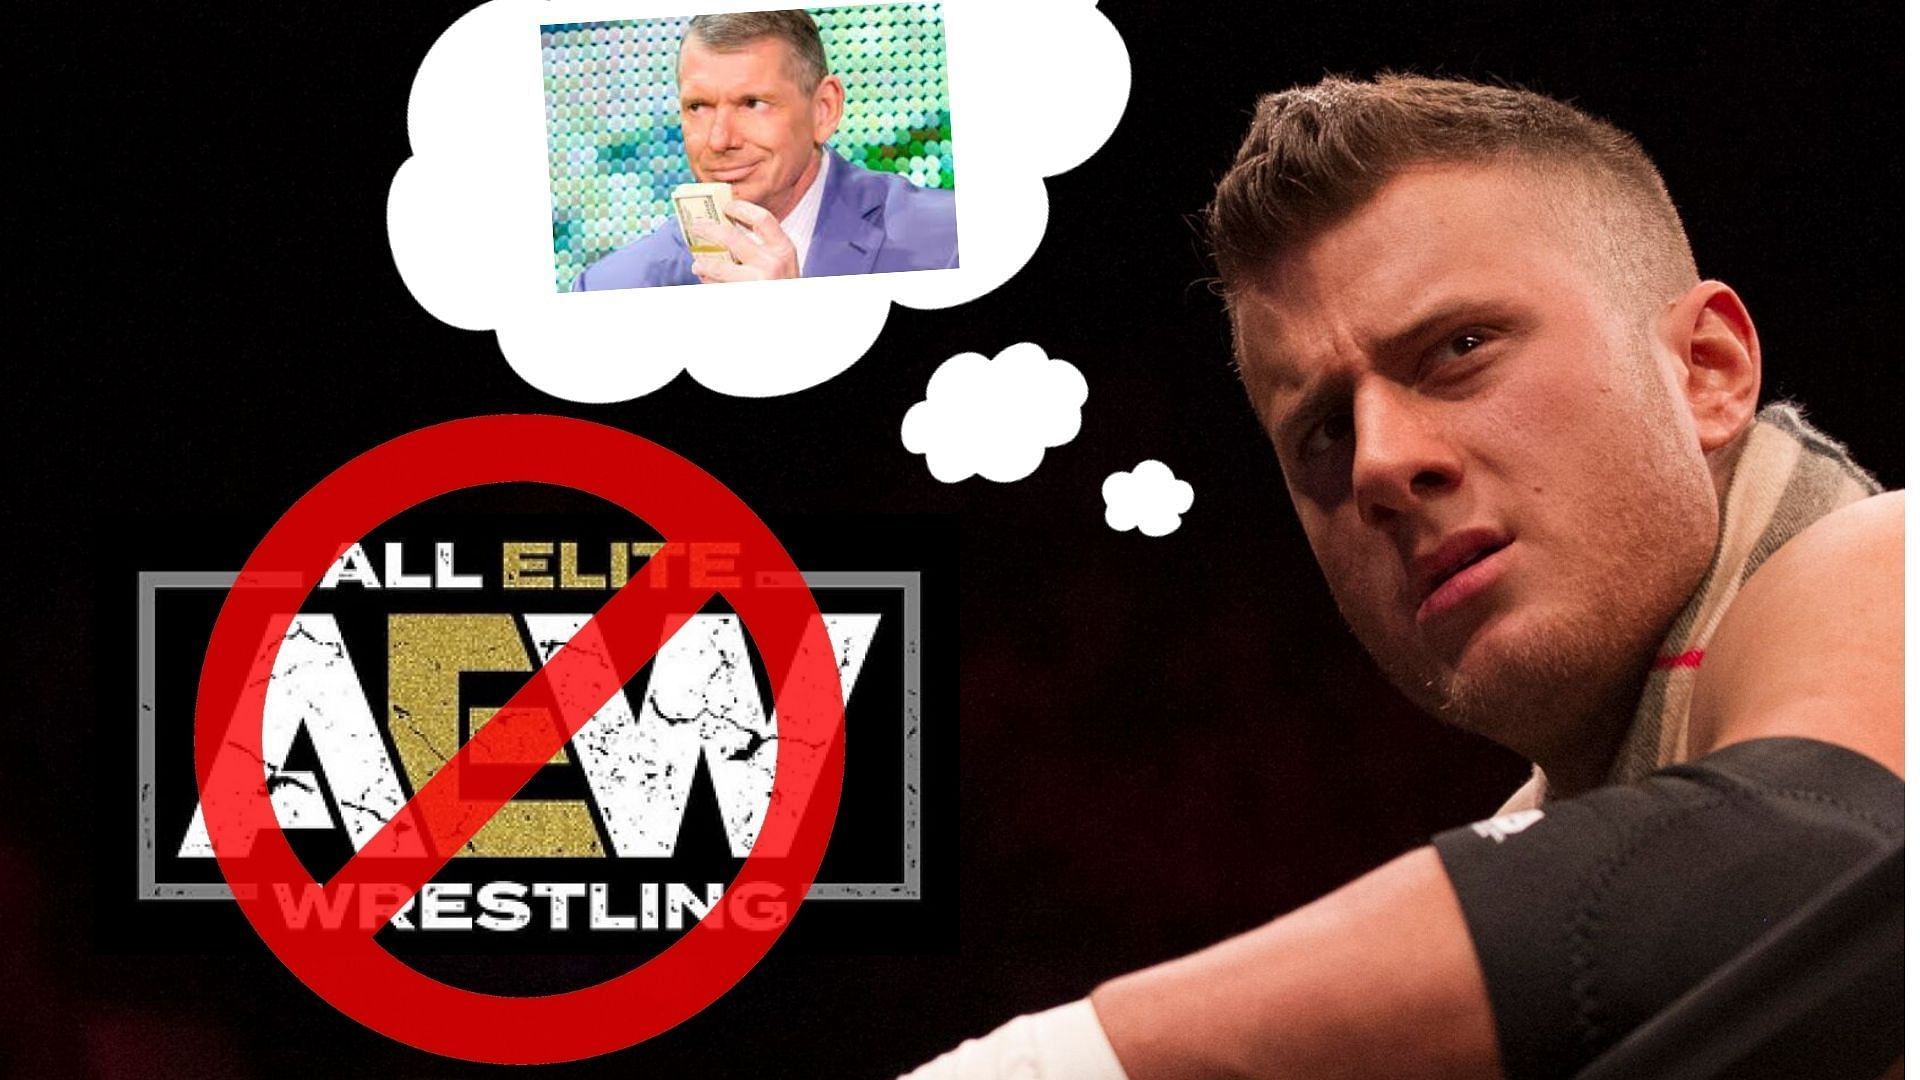 MJF has blurred the lines between storyline and real-life in his spat with AEW